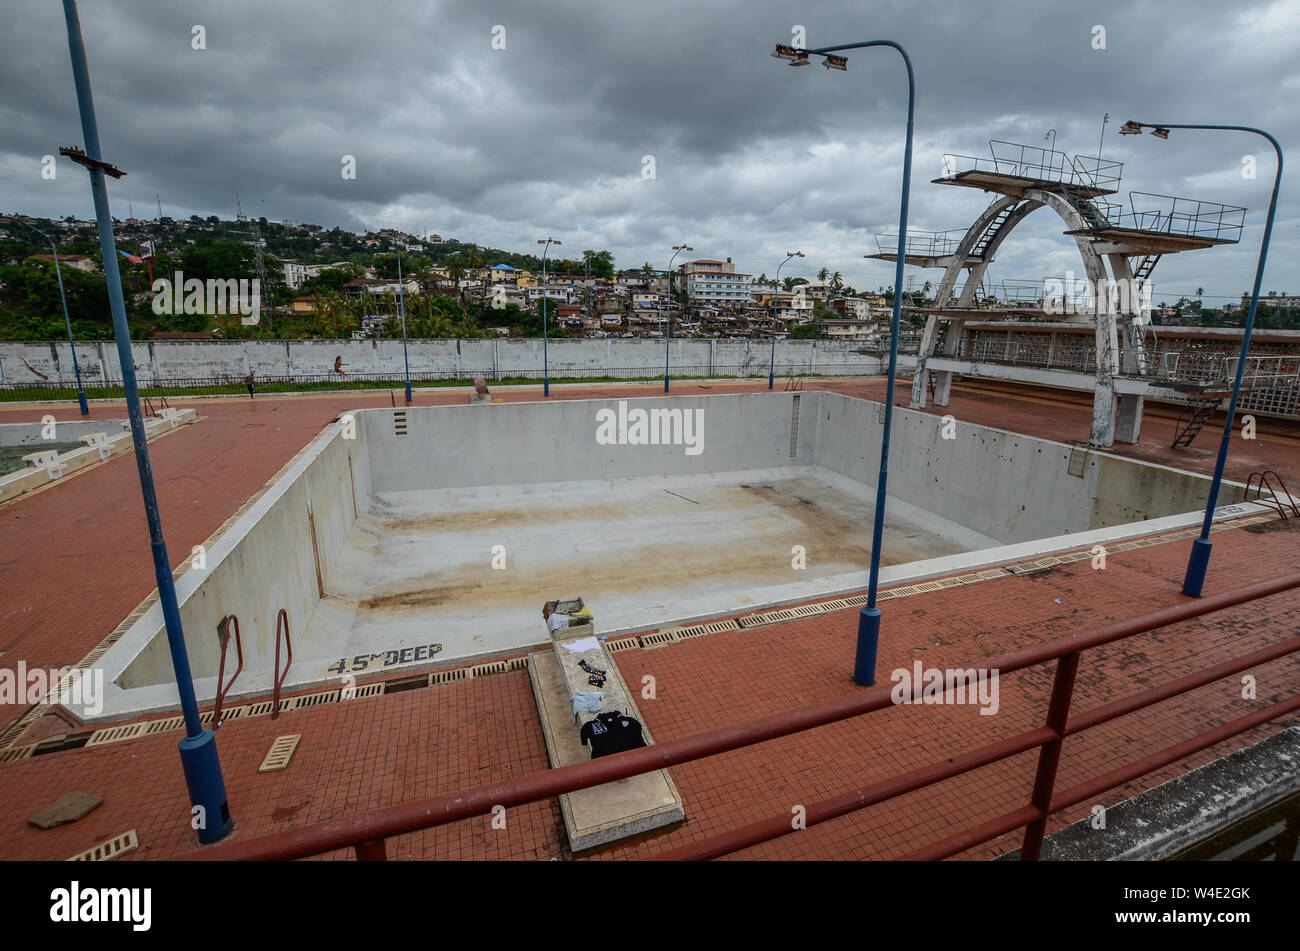 The swimming pool at the National Stadium in Freetown, Sierra Leone in 2014 Stock Photo